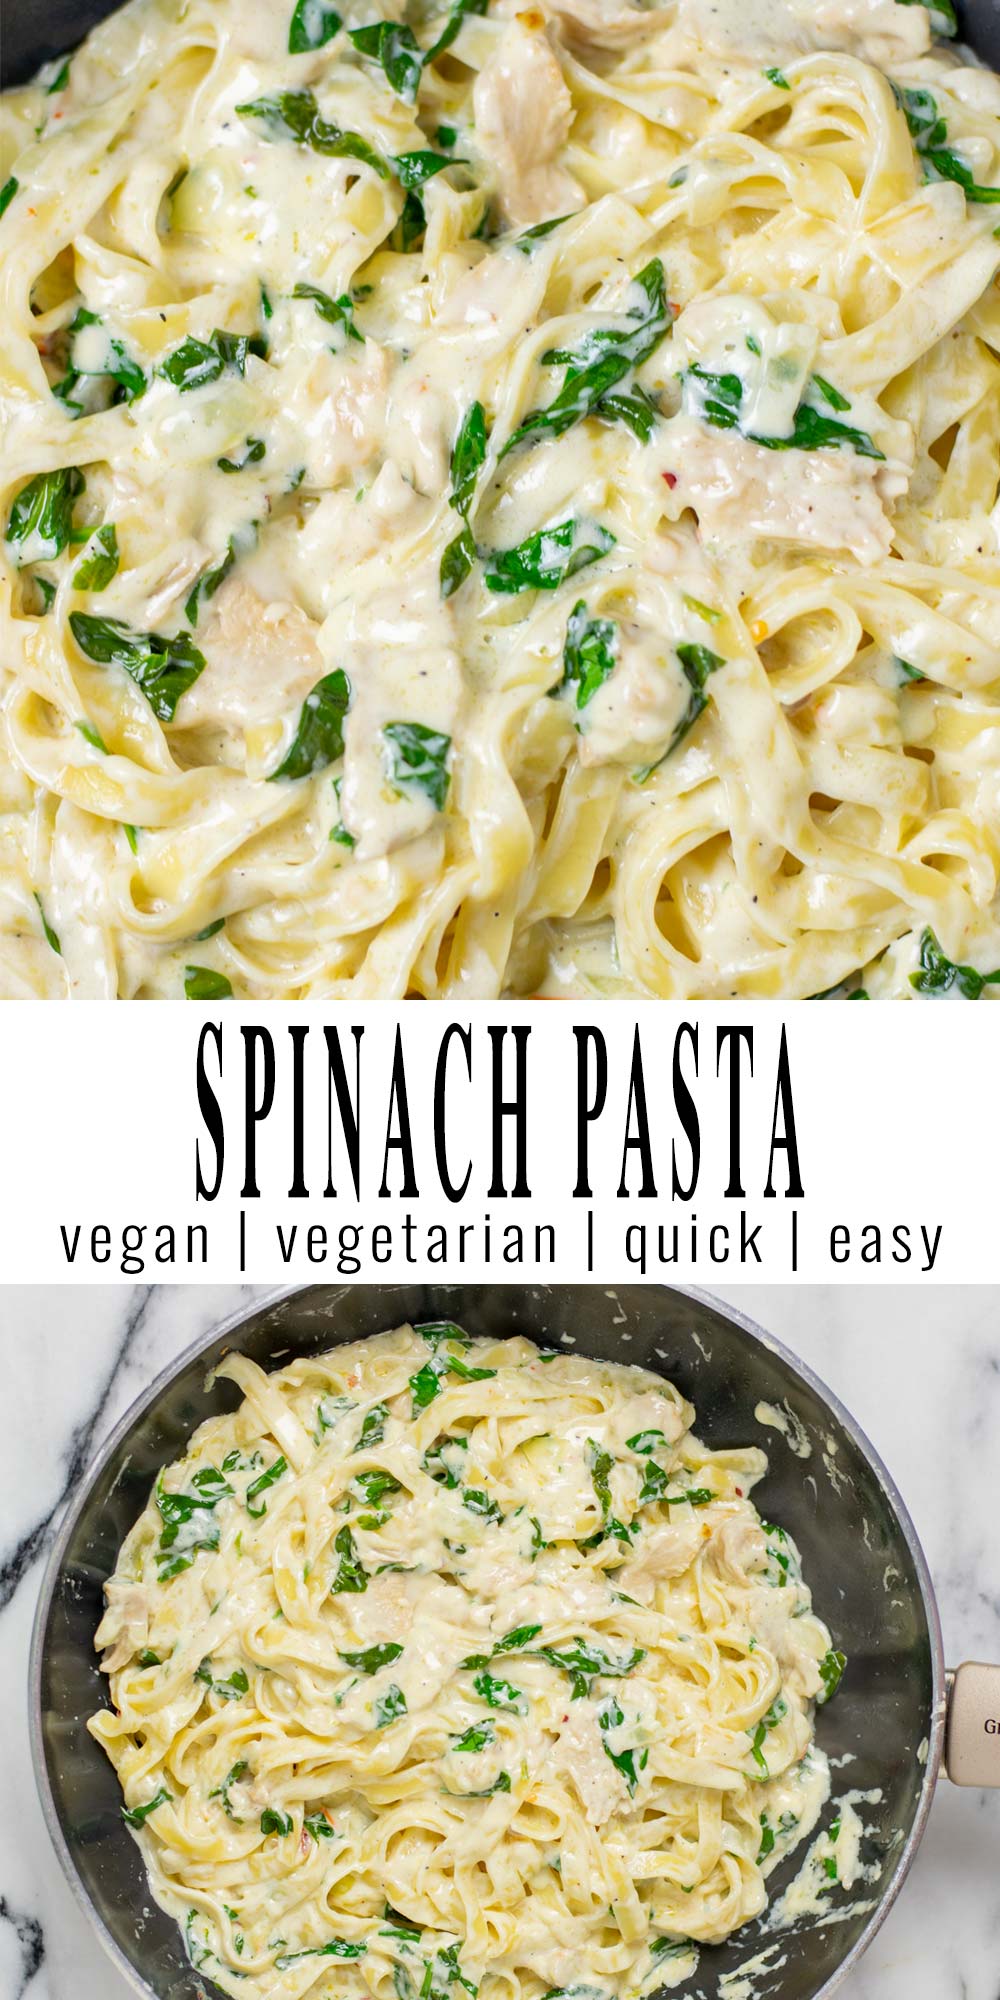 Collage of two pictures of the Spinach Pasta with recipe title text.